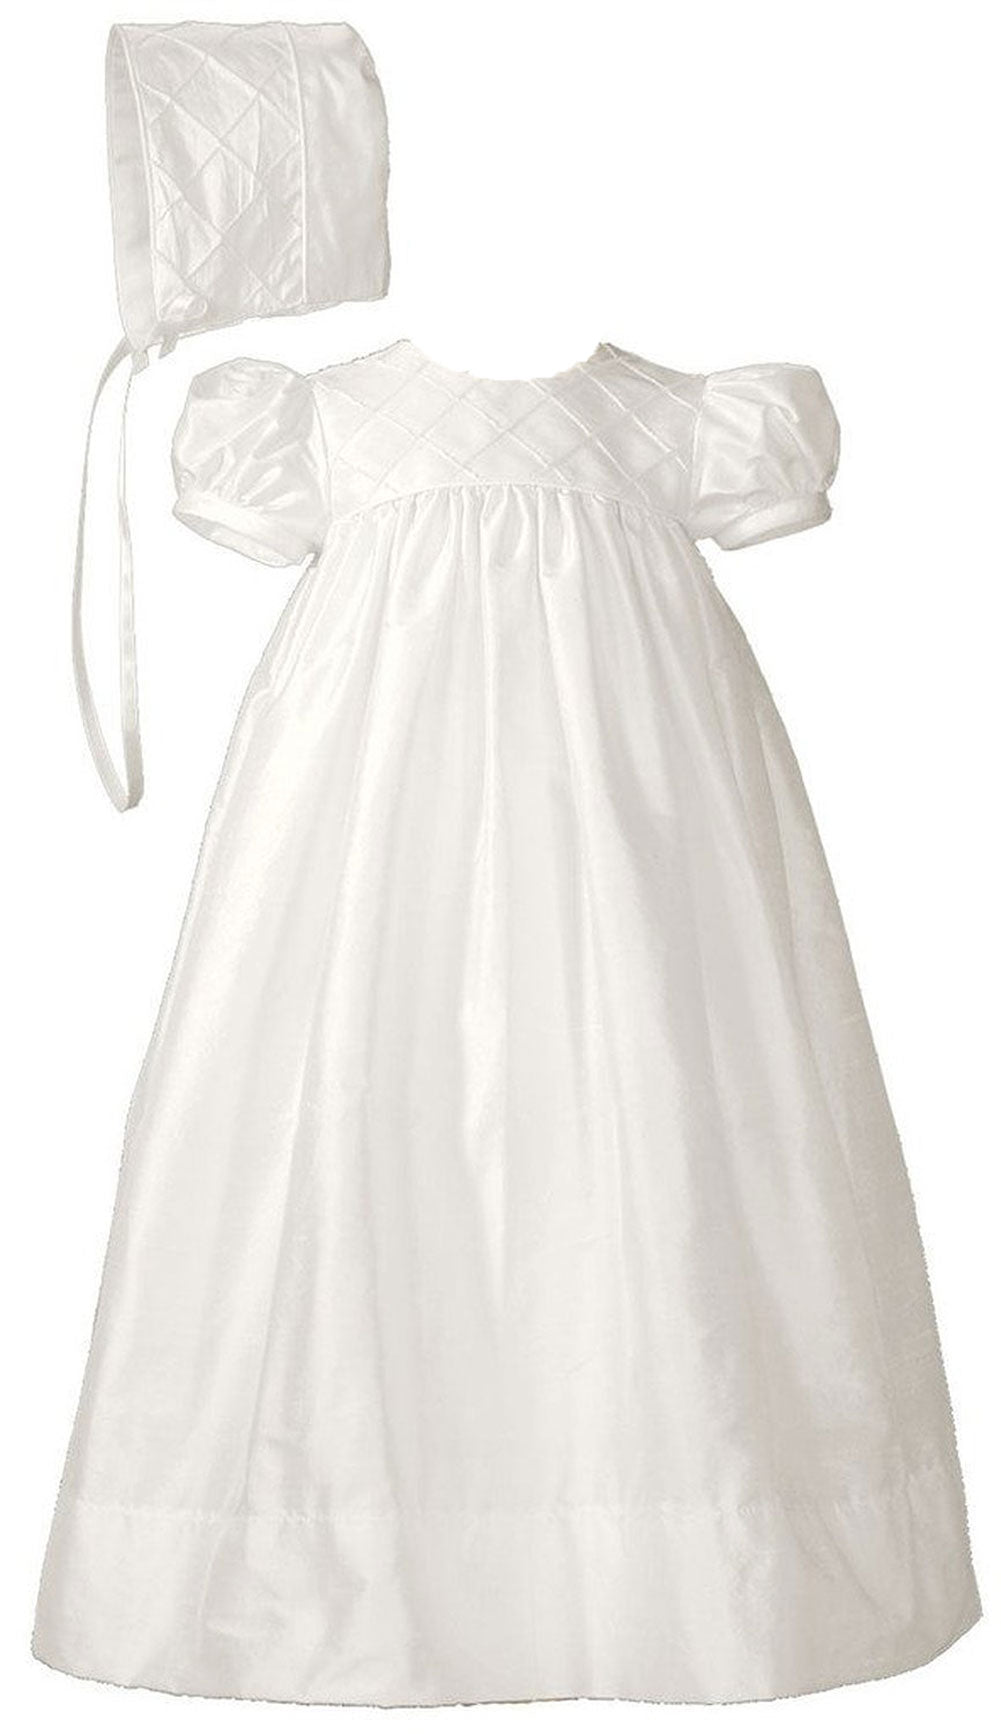 Girls 25″ Victorian Style Cotton Christening Baptism Gown (CO78GS)